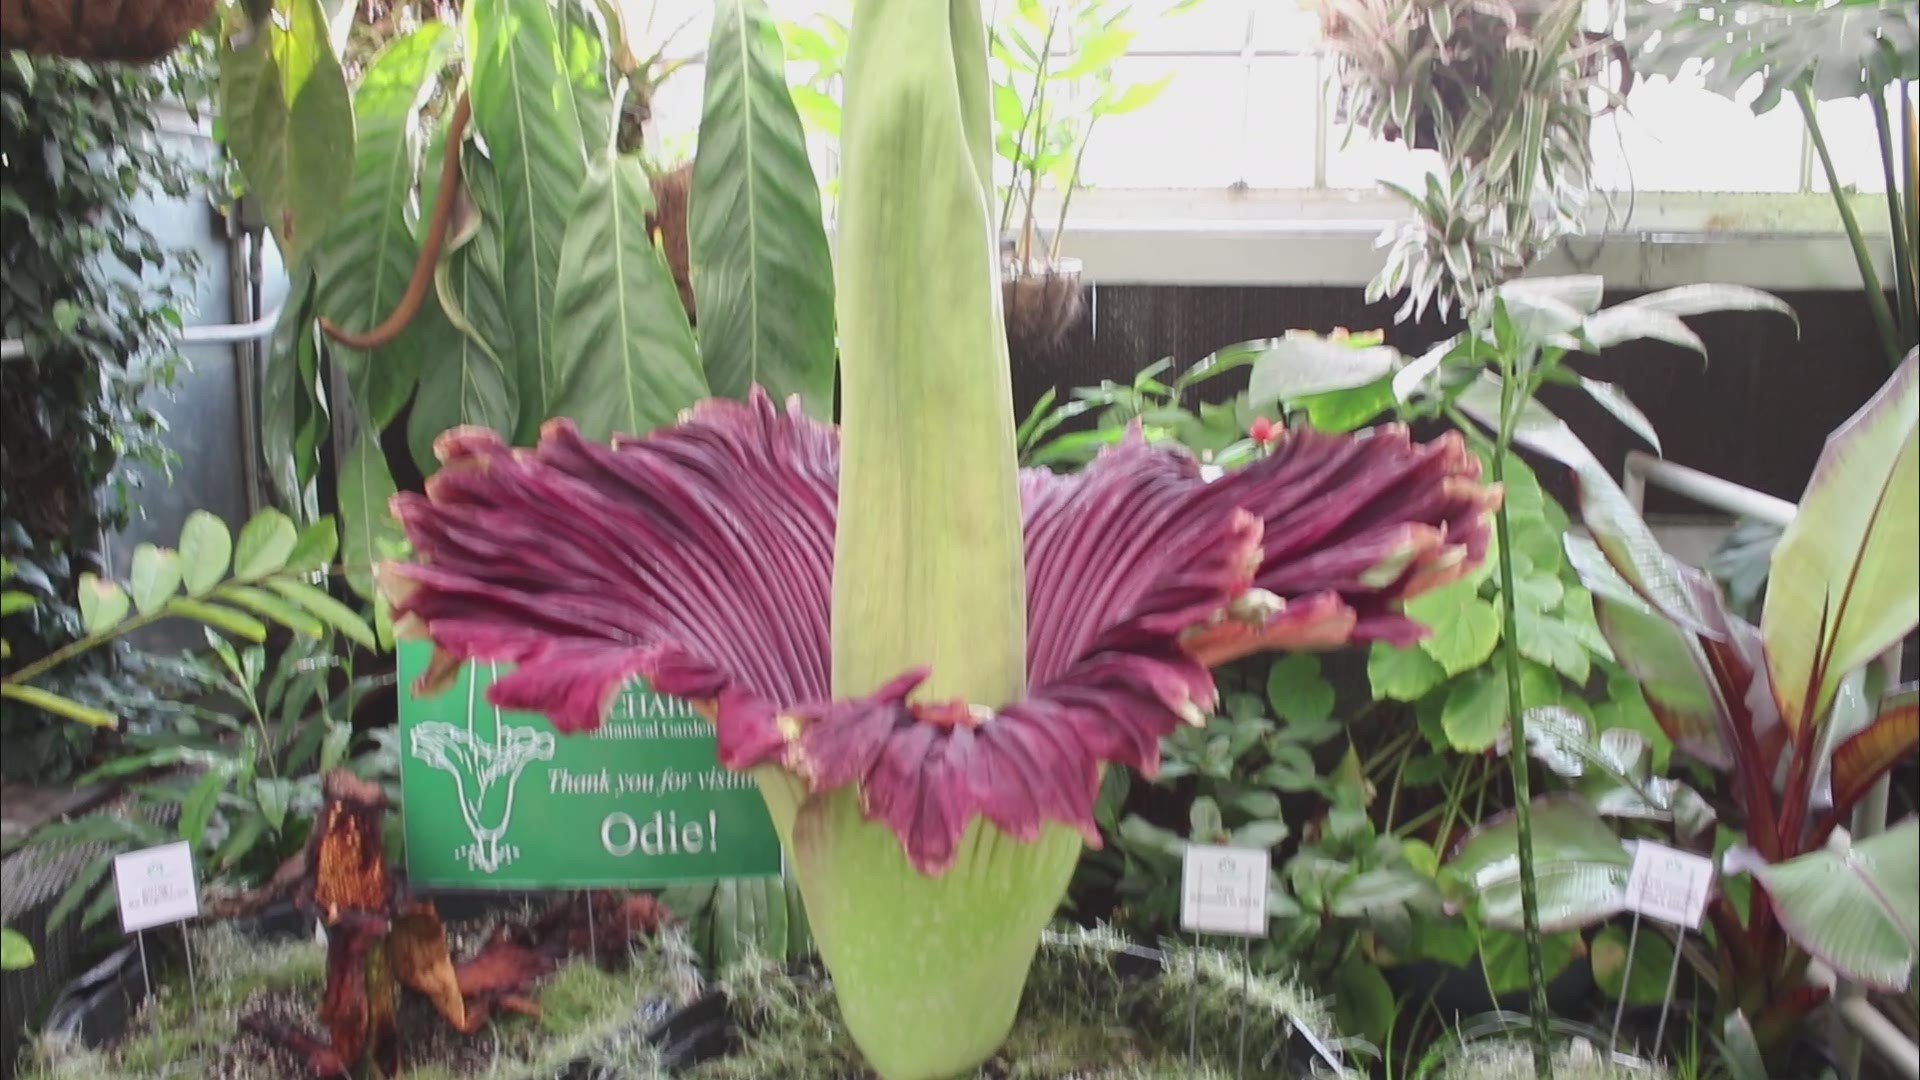 Odie the corpse flower in bloom at UNC Charlotte